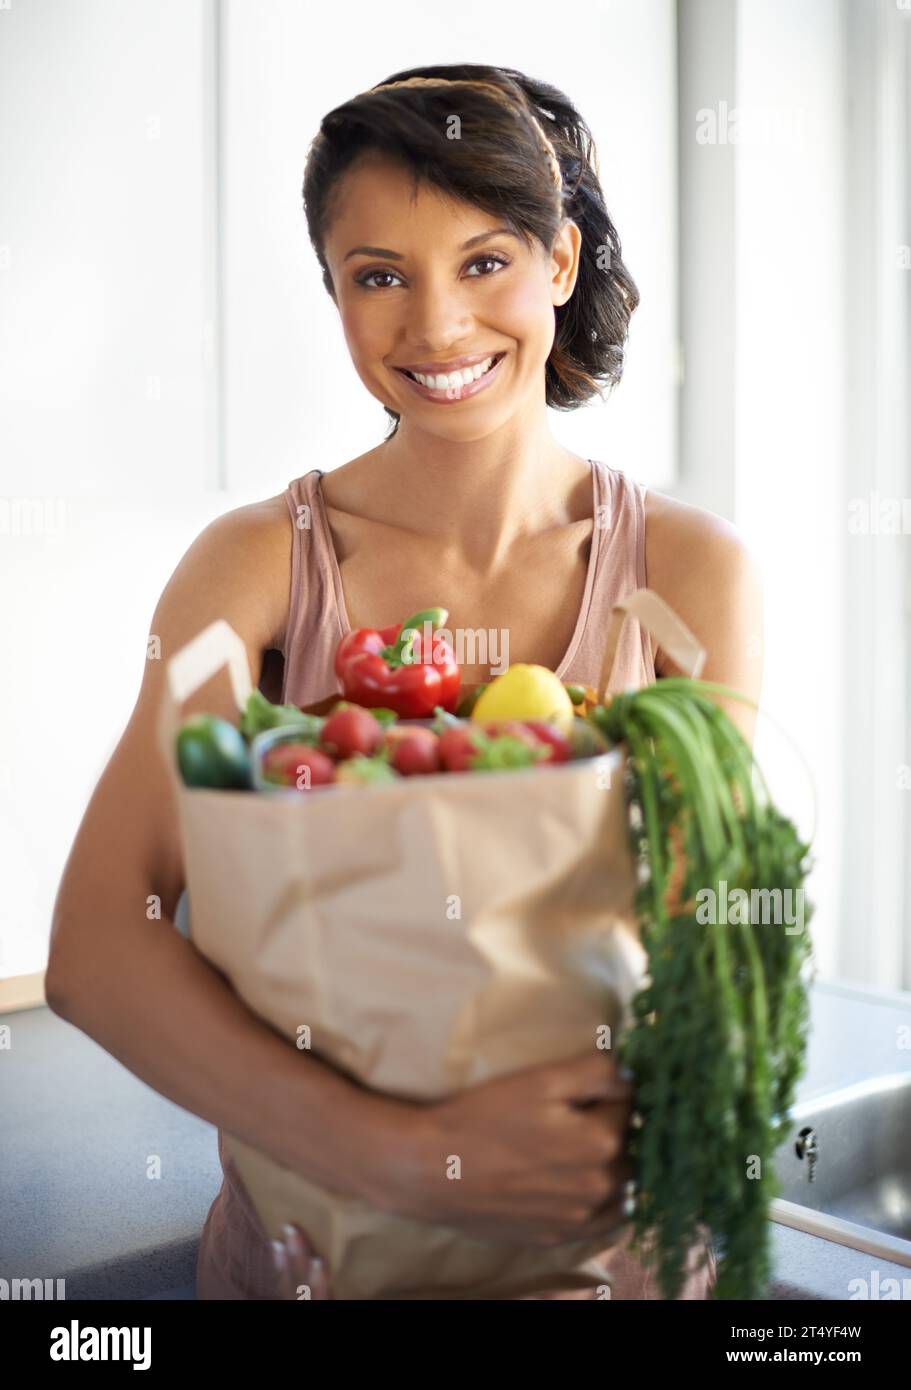 Happy woman, portrait and shopping bag with groceries, vegetables or fresh produce in kitchen at home. Female person, shopper or vegan smile with food Stock Photo